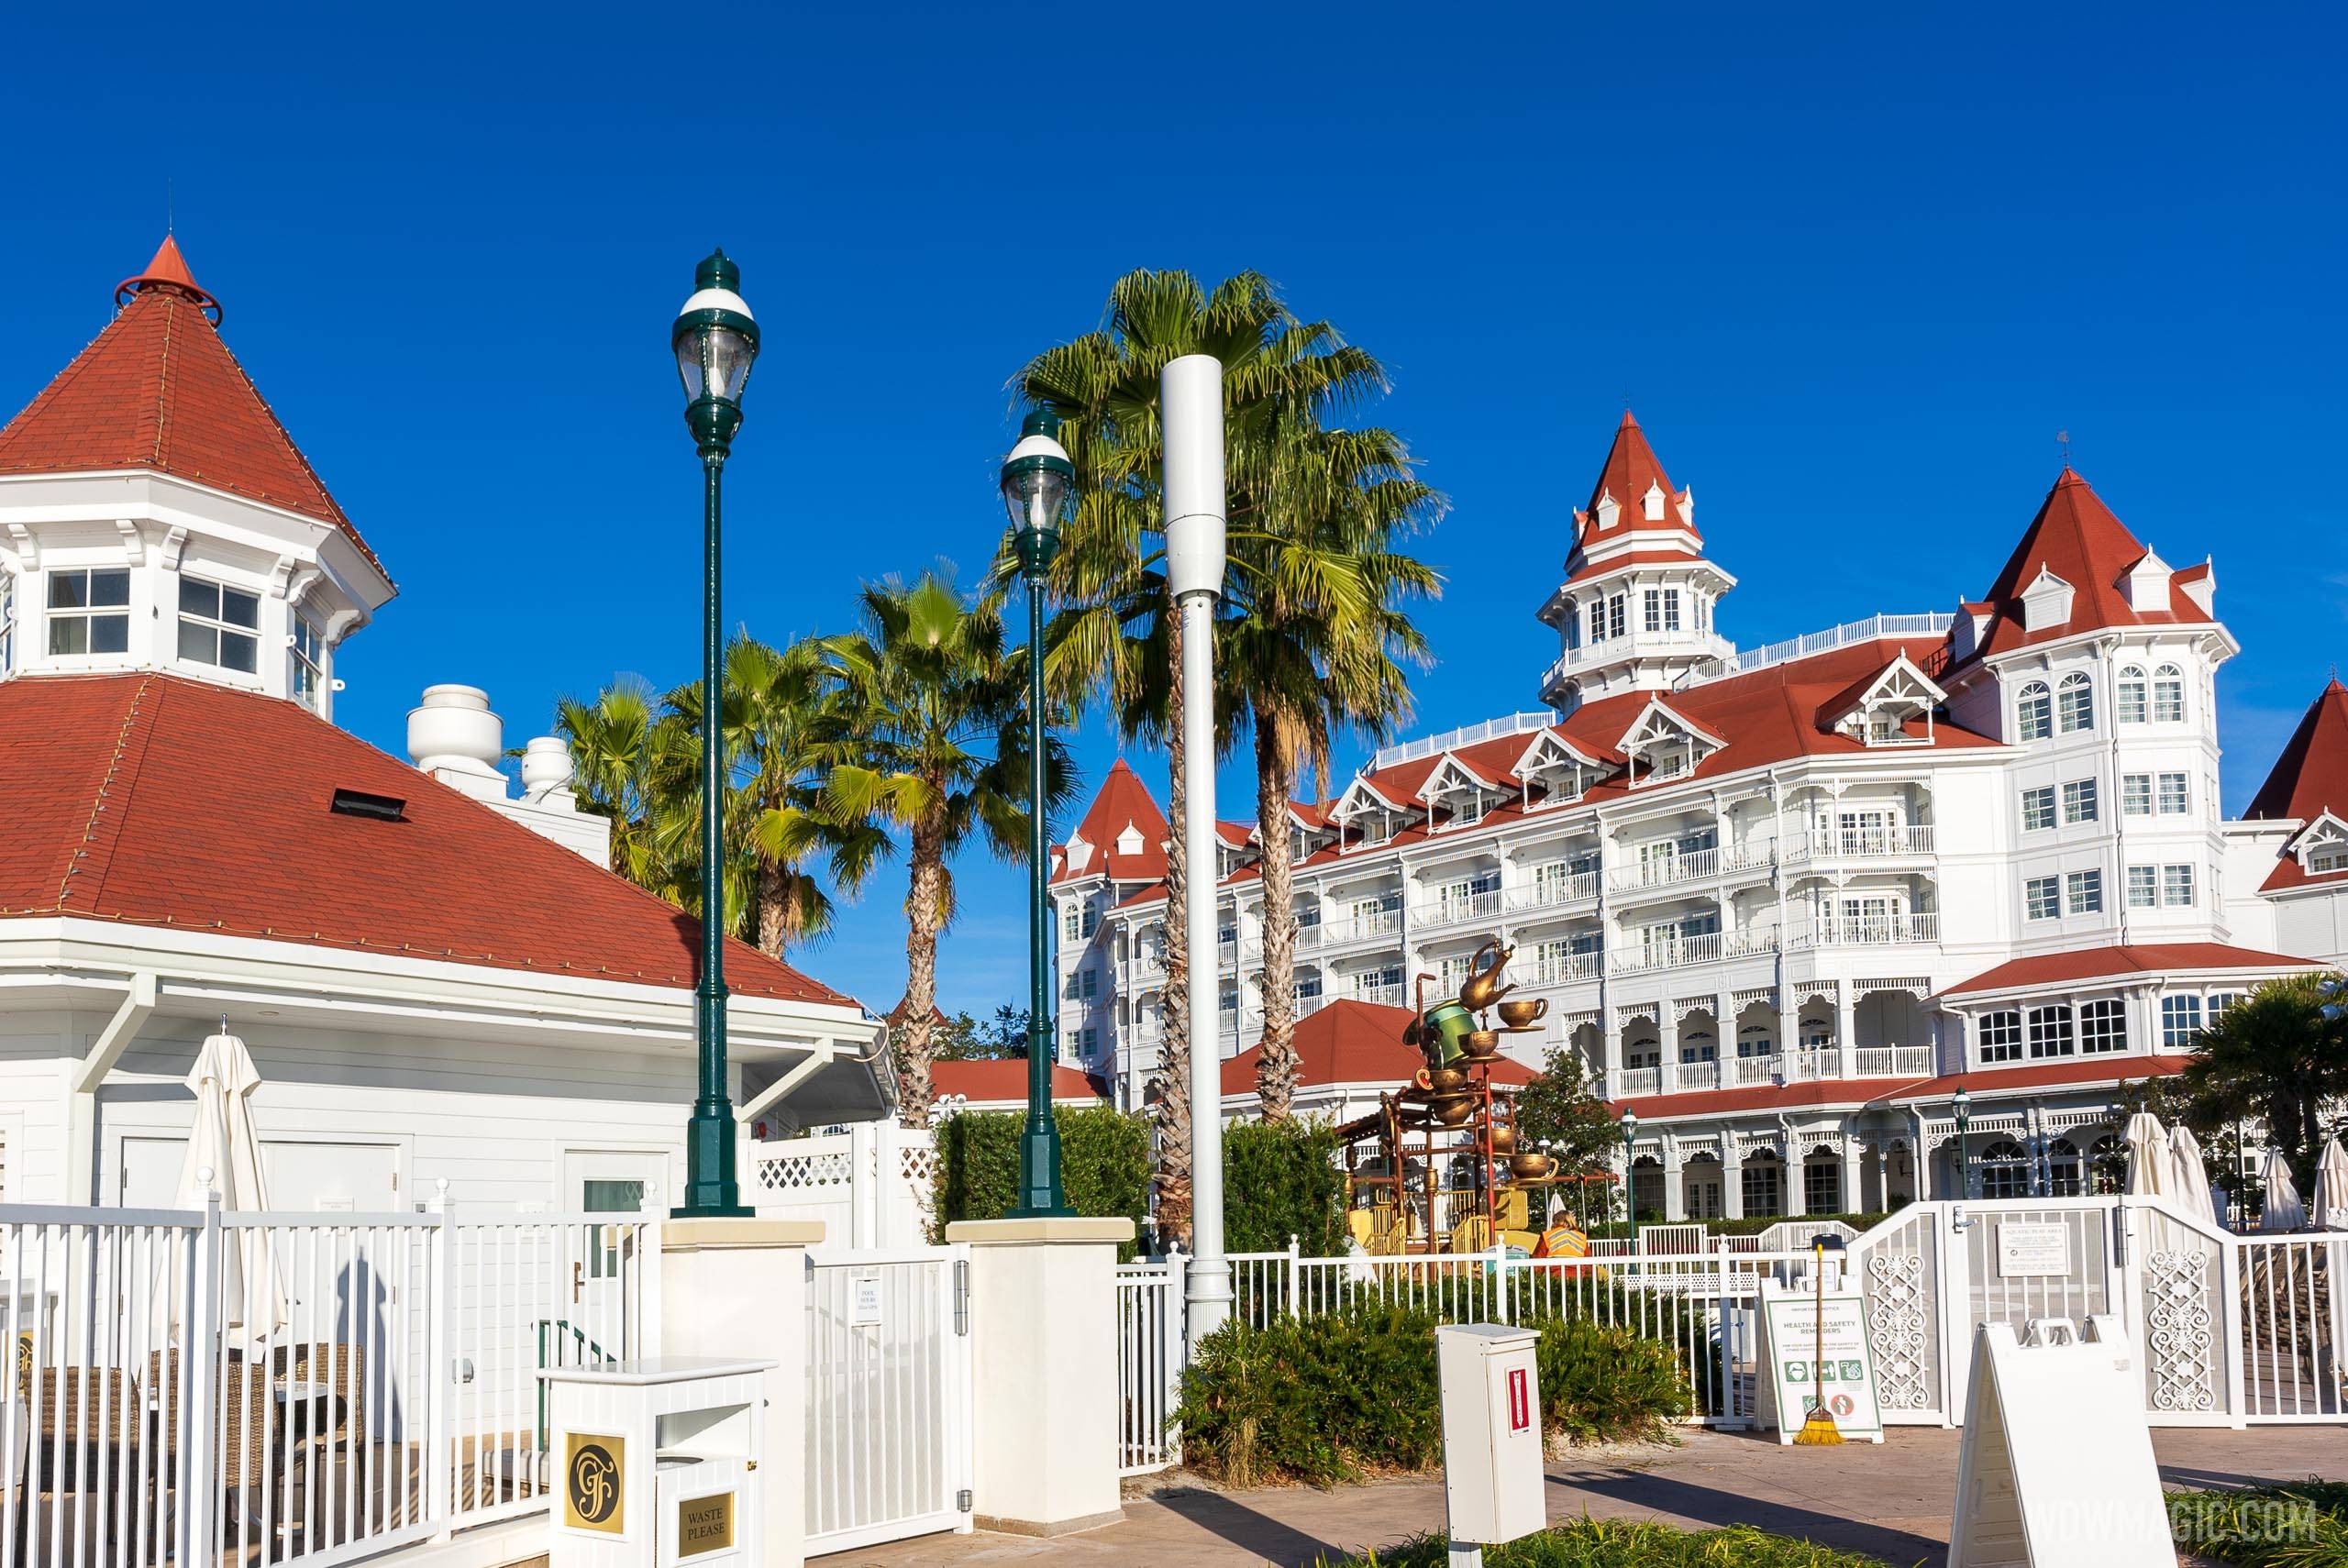 PHOTOS - 5G cell towers at Disney's Grand Floridian Resort